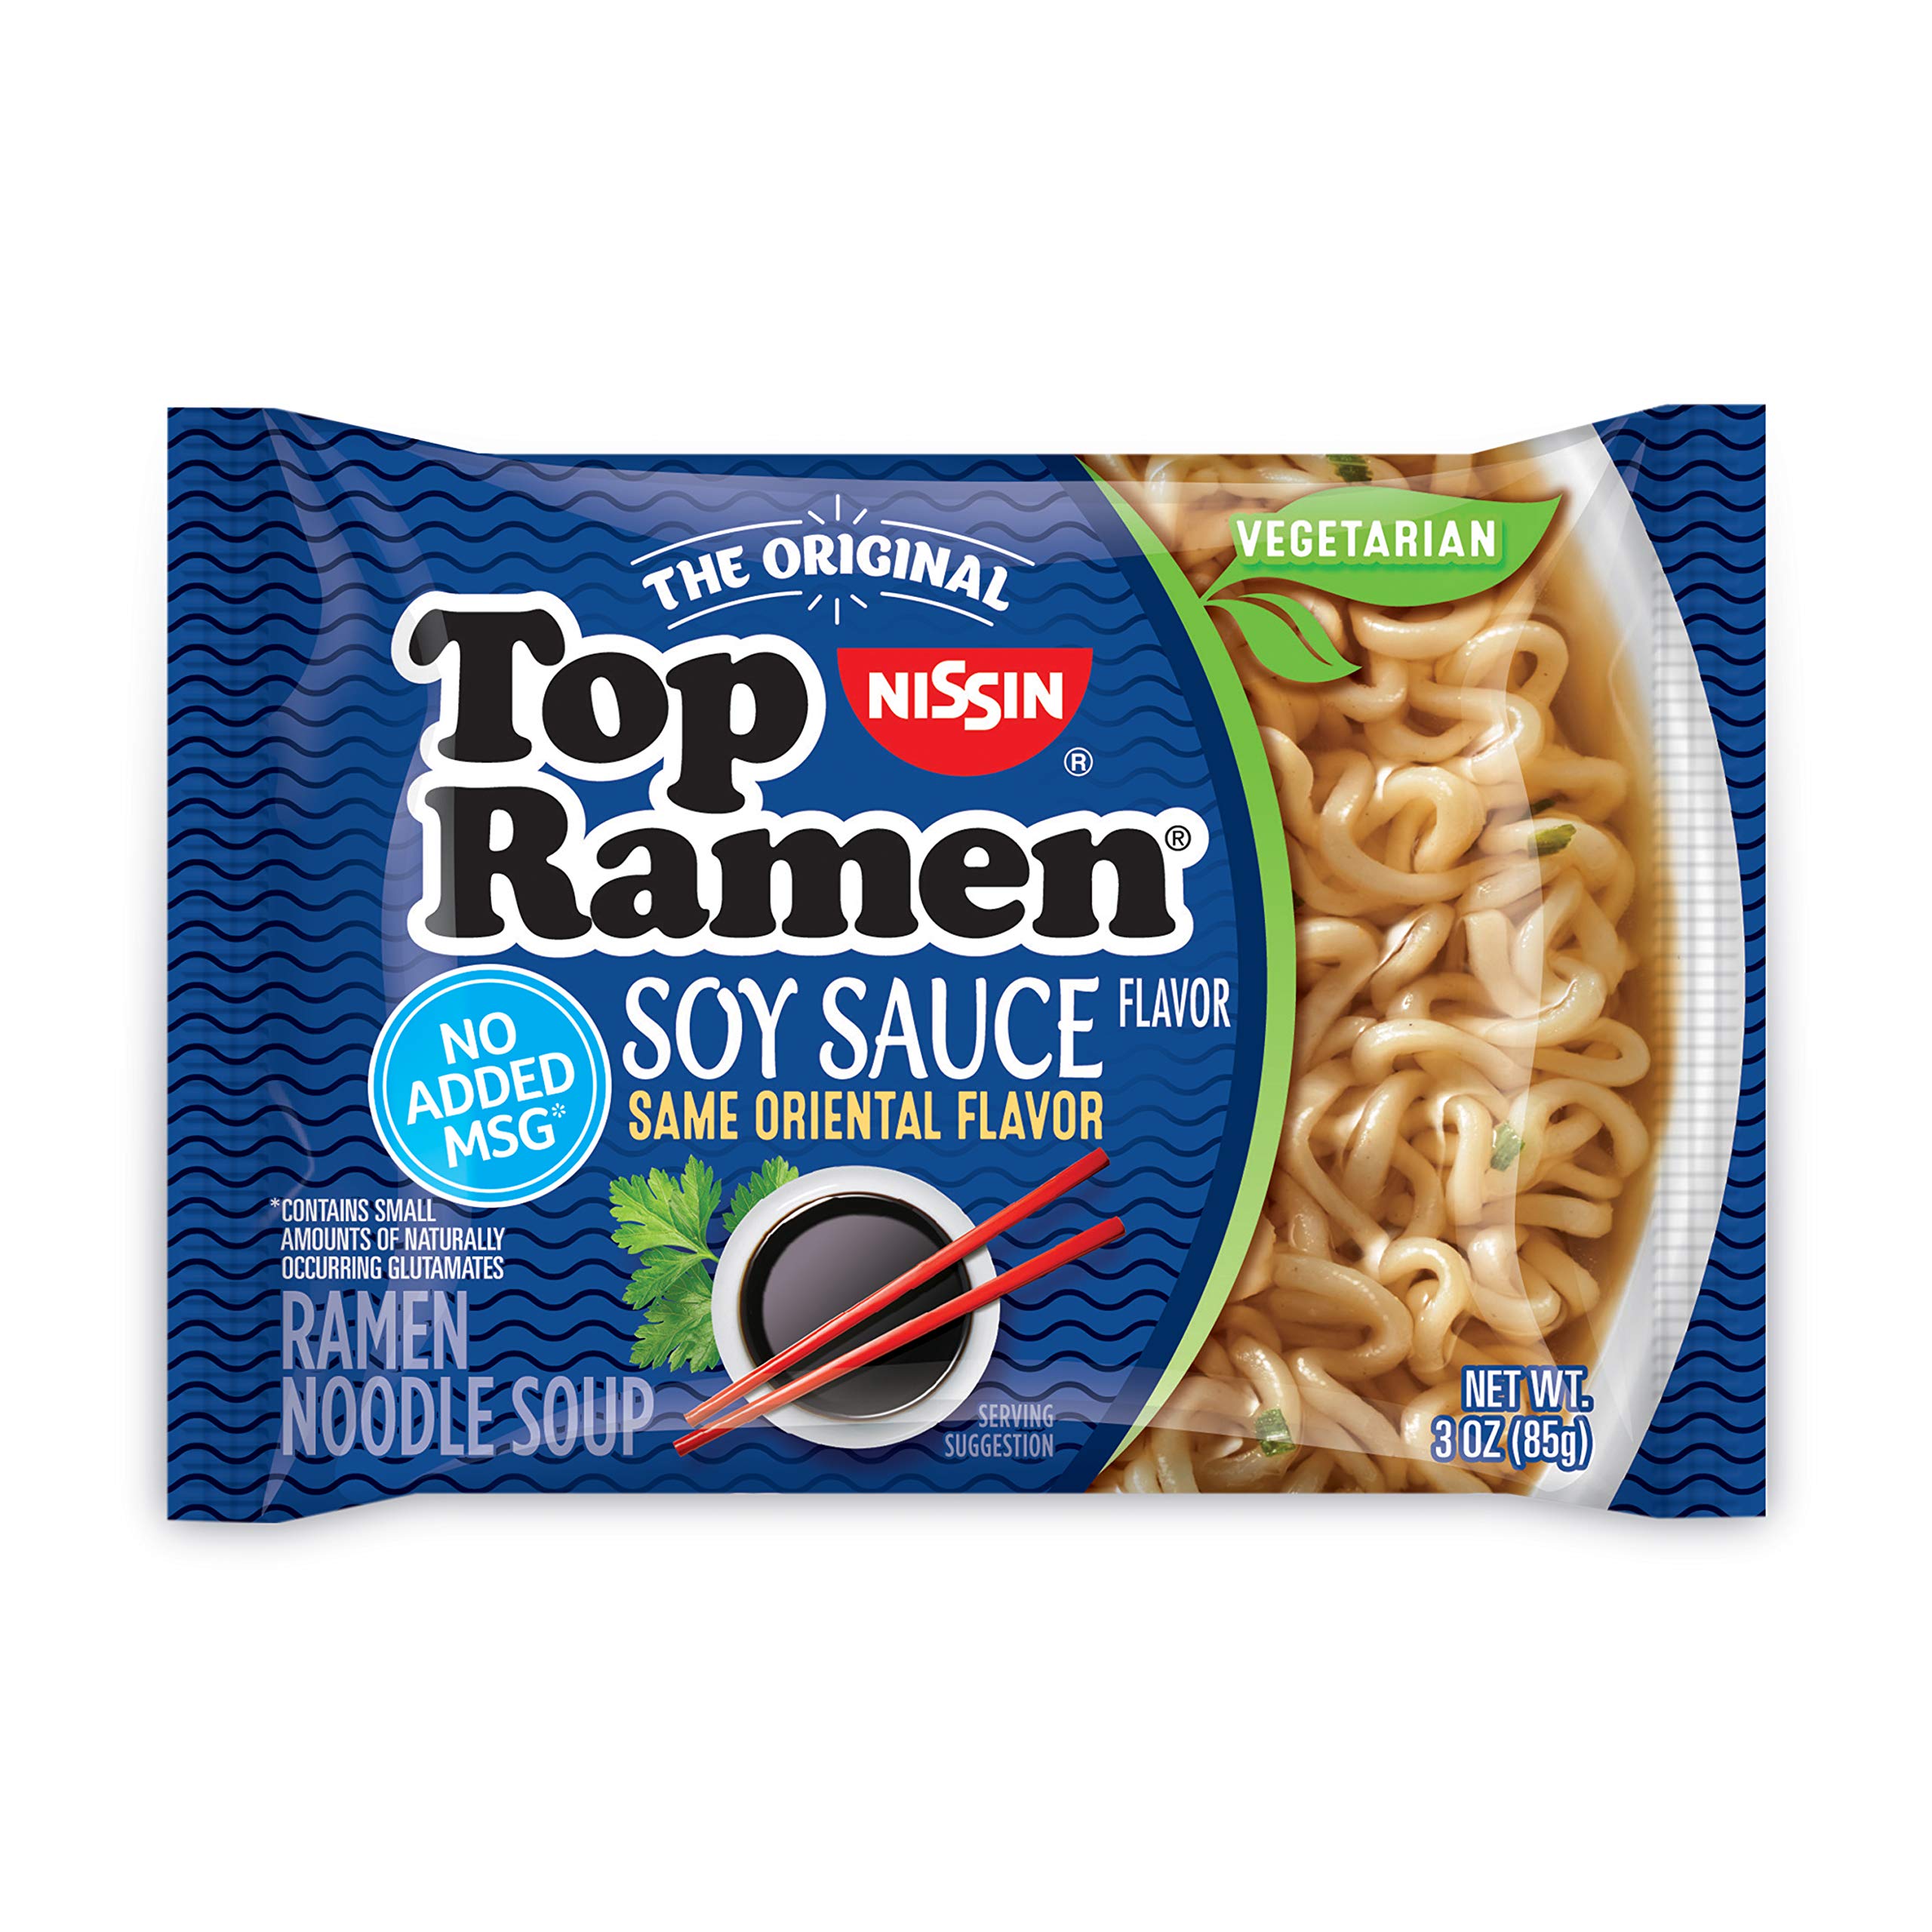 Nissin Top Ramen Noodle Soup, Soy Sauce (aka Oriental) Flavor, 3 Ounce (Pack of 24) - $9.99 or less with Subscribe & Save